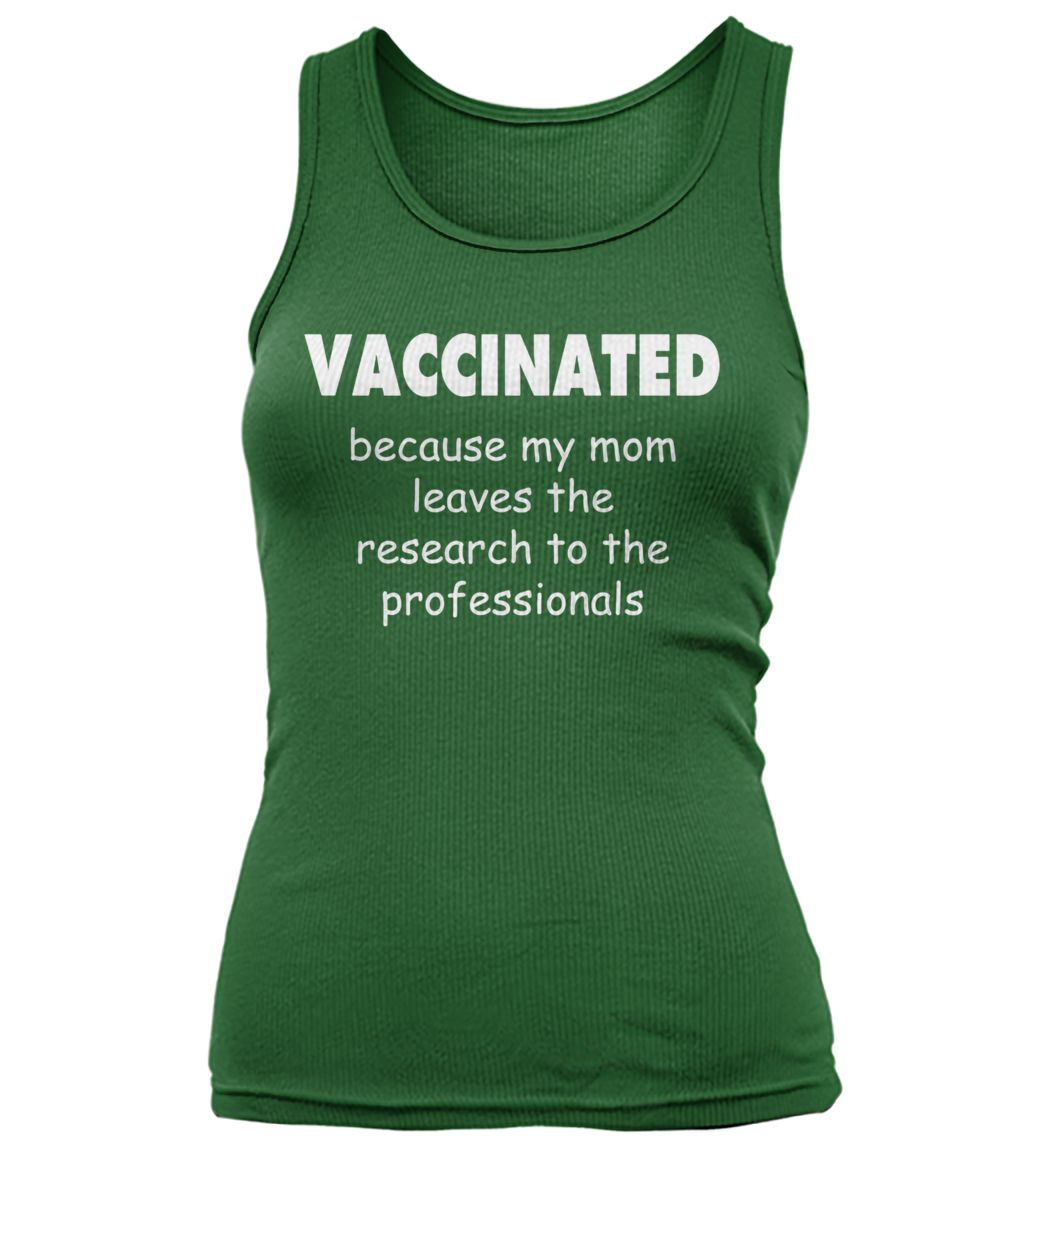 Vaccinated because my mom leaves the research to the professionals women's tank top